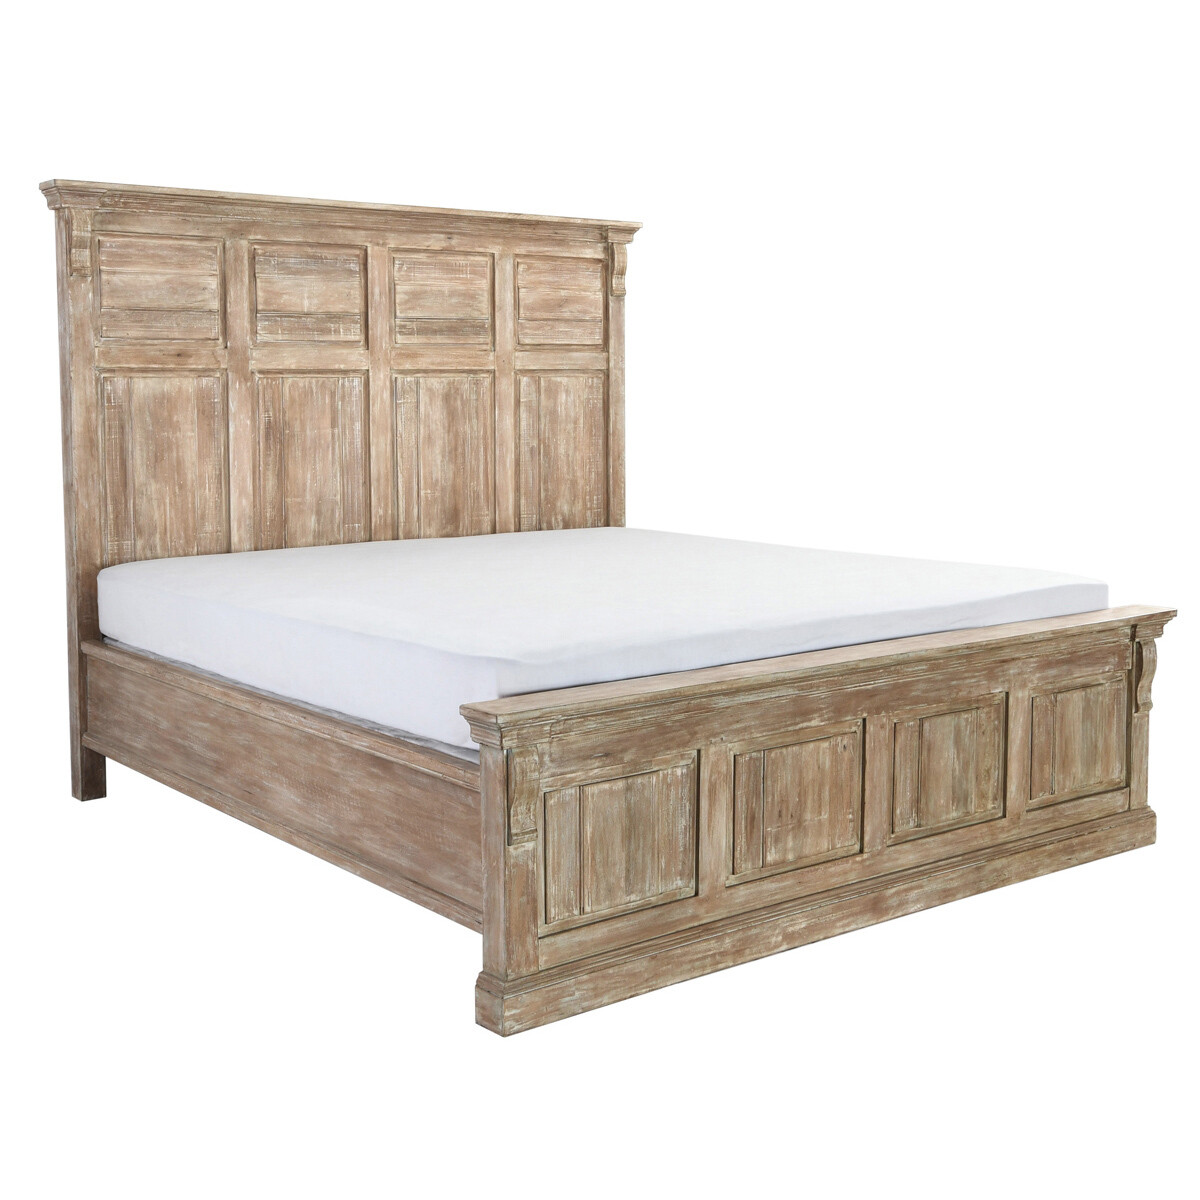 Adelaide King Bed